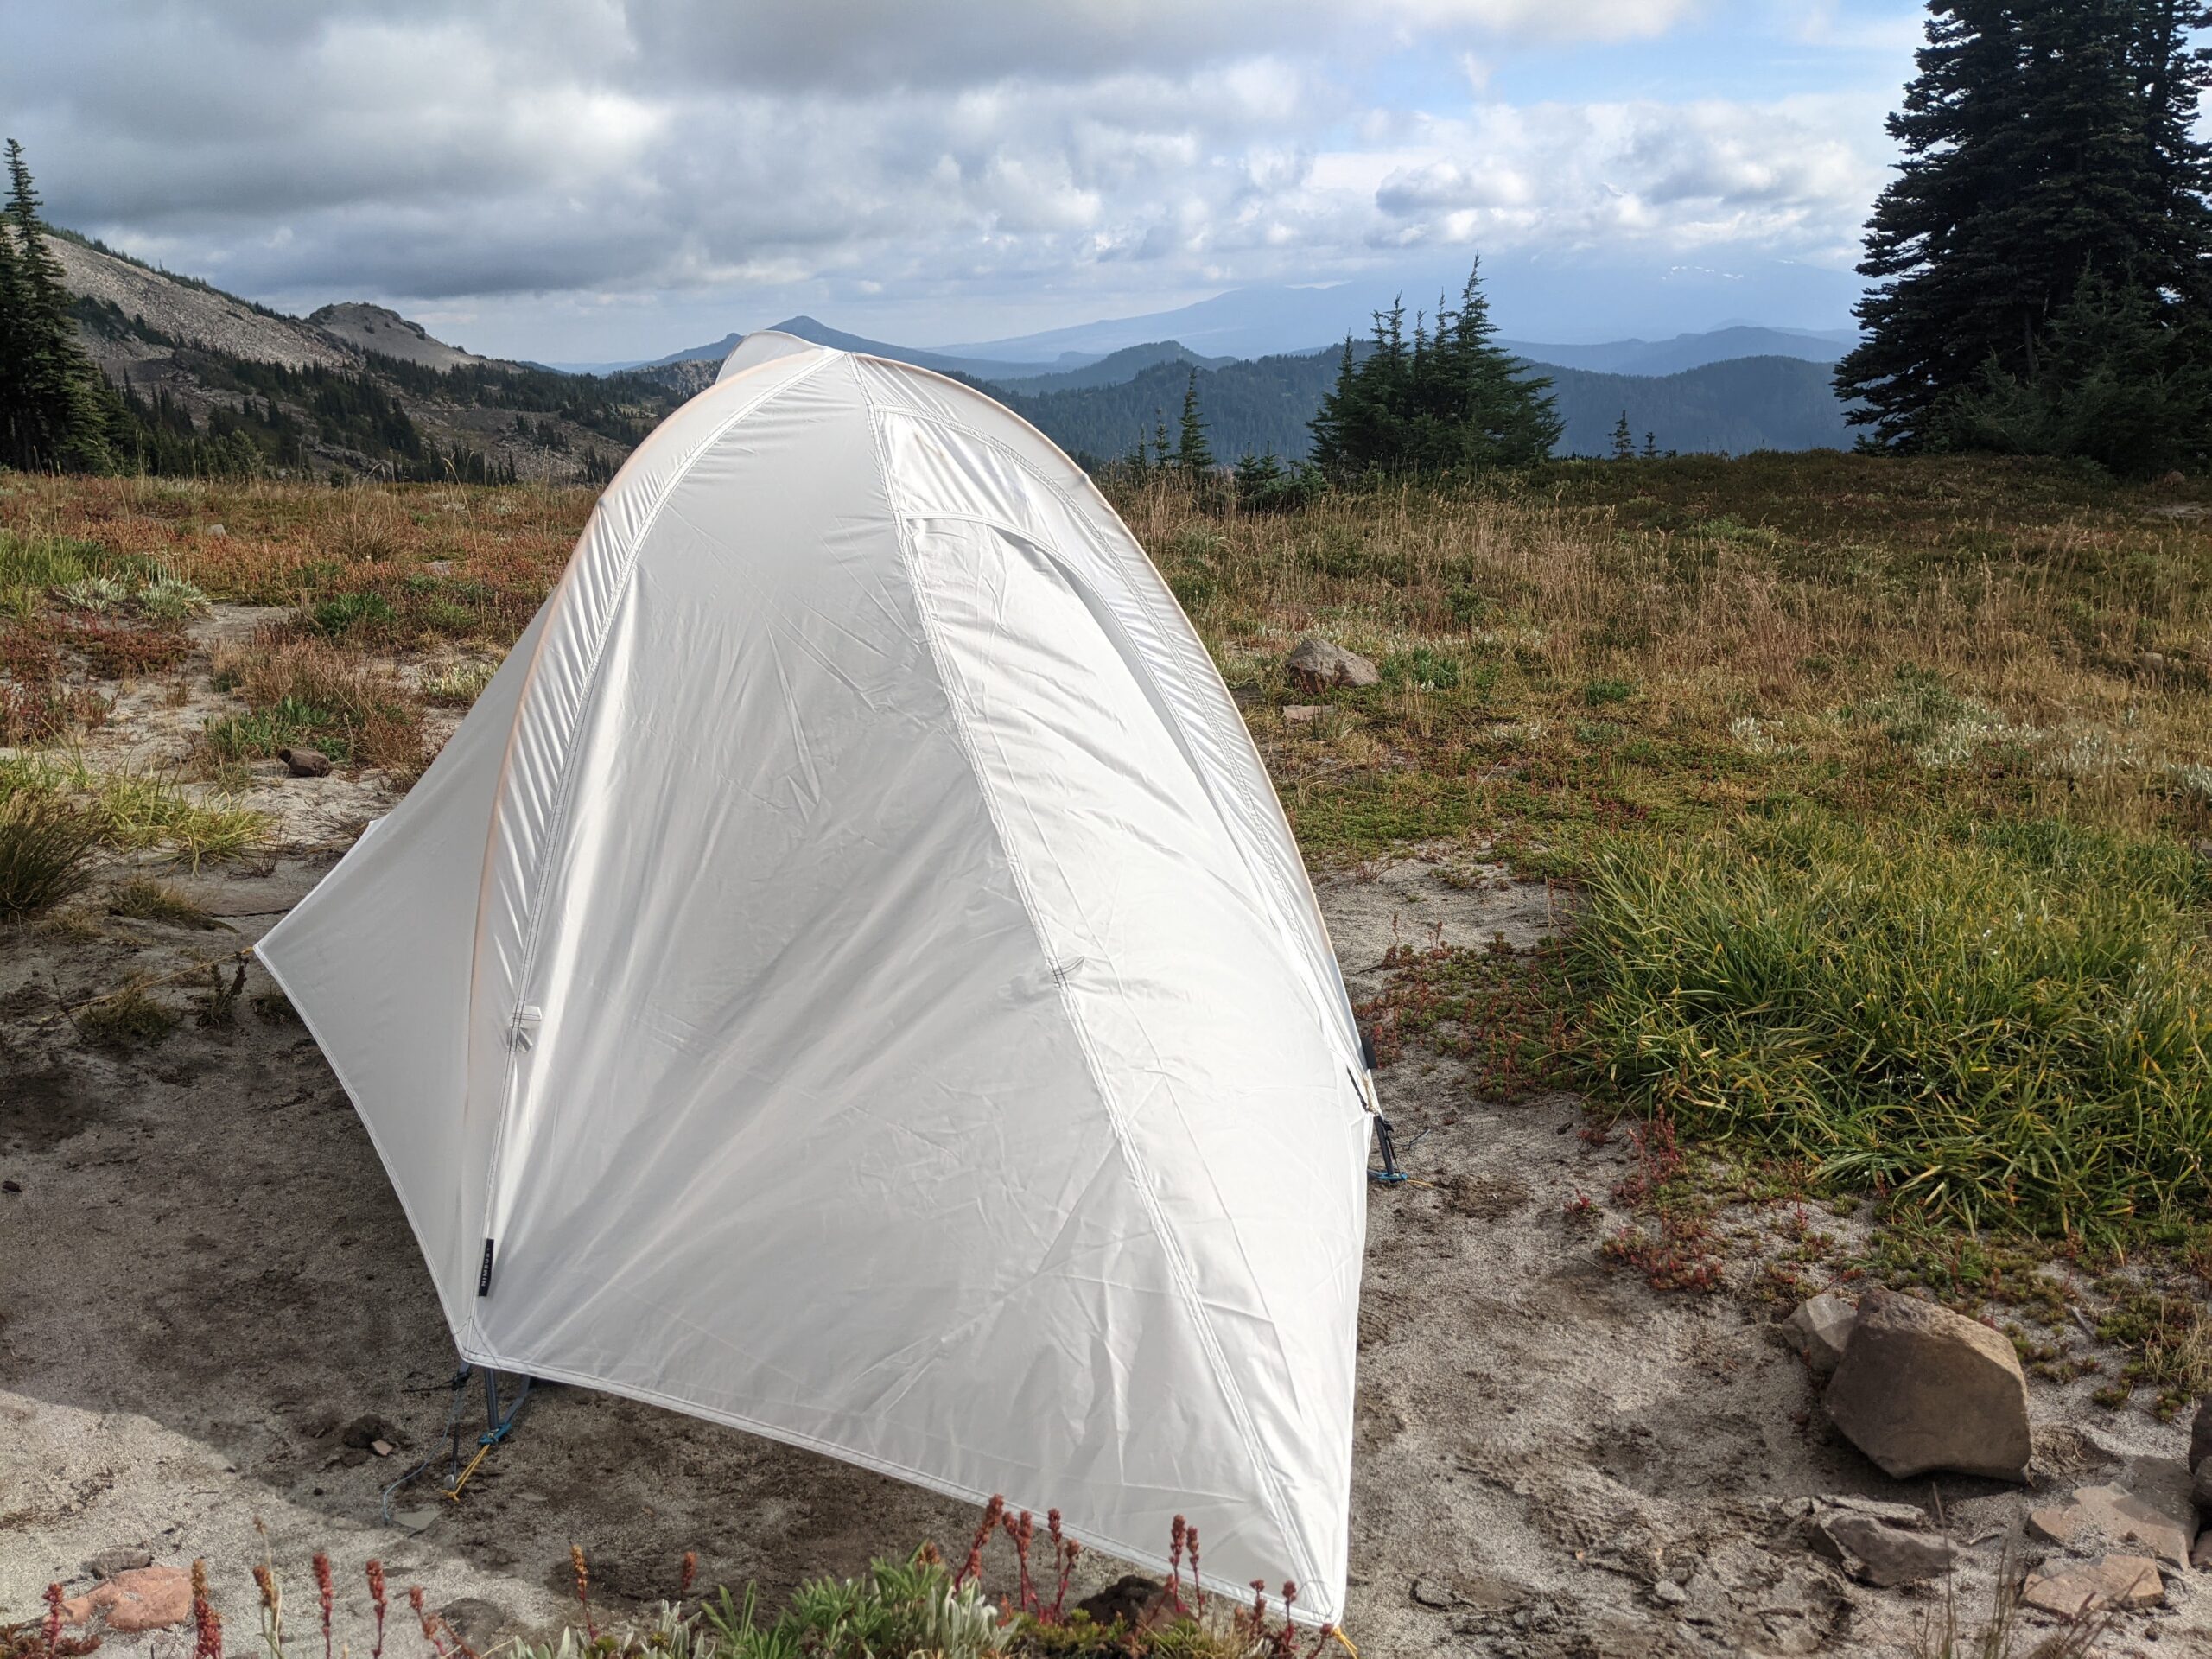 The impressive Mountain Hardwear Nimbus UL 1 comes in at under two pounds and was easy to set up for the first time in the windy alpine.